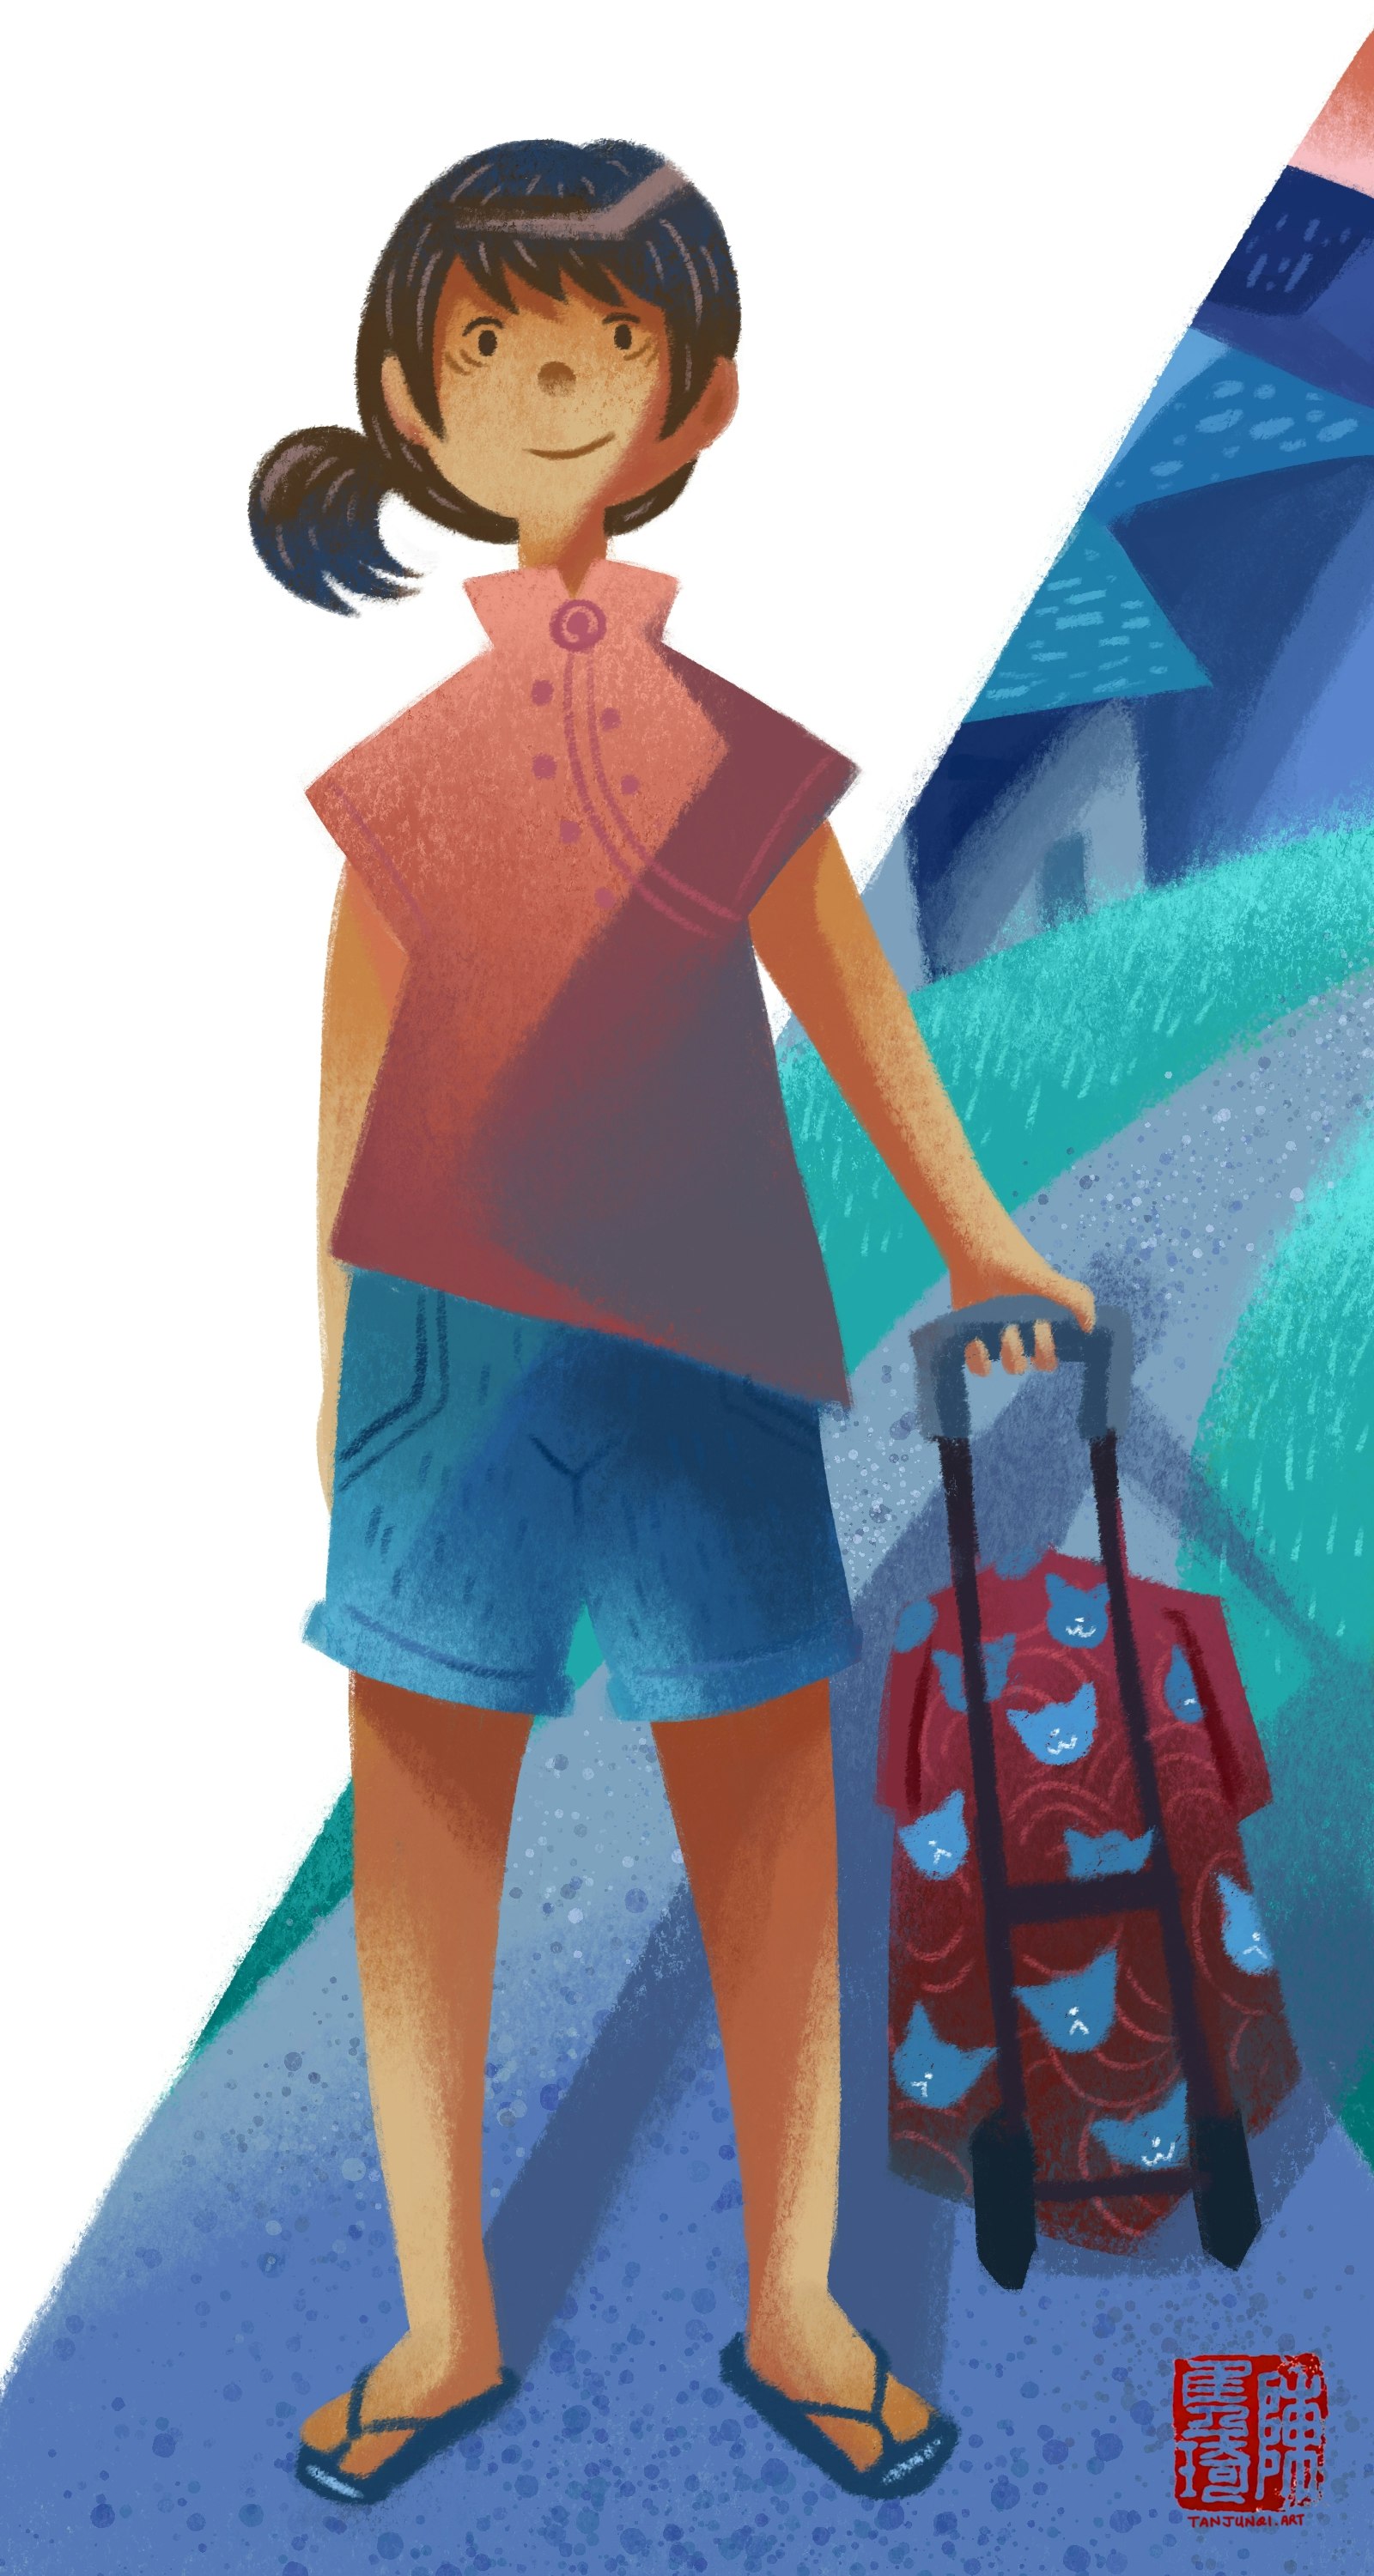 Digital painting with a crayon-textured and geometric aesthetic, showing a woman wearing a pink mandarin collar blouse and blue shorts, with a wayward ponytail, standing and holding onto a grocery trolley behing her, with a street and some houses in the background with a bluish atmosphere